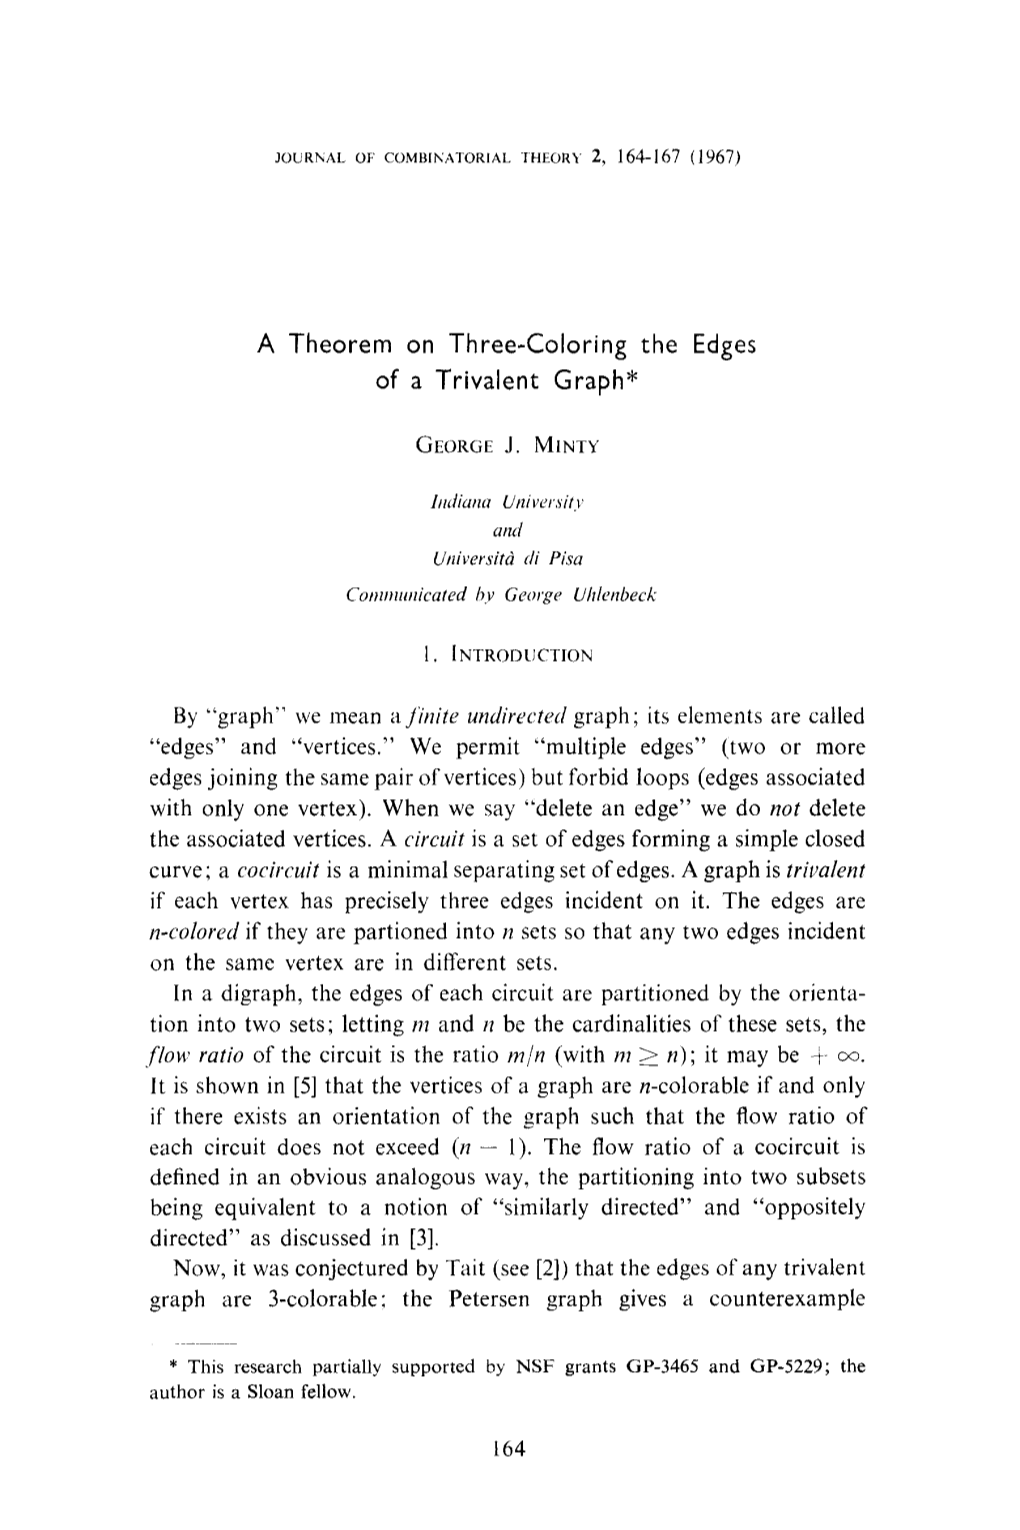 A Theorem on Three-Coloring the Edges of a Trivalent Graph*